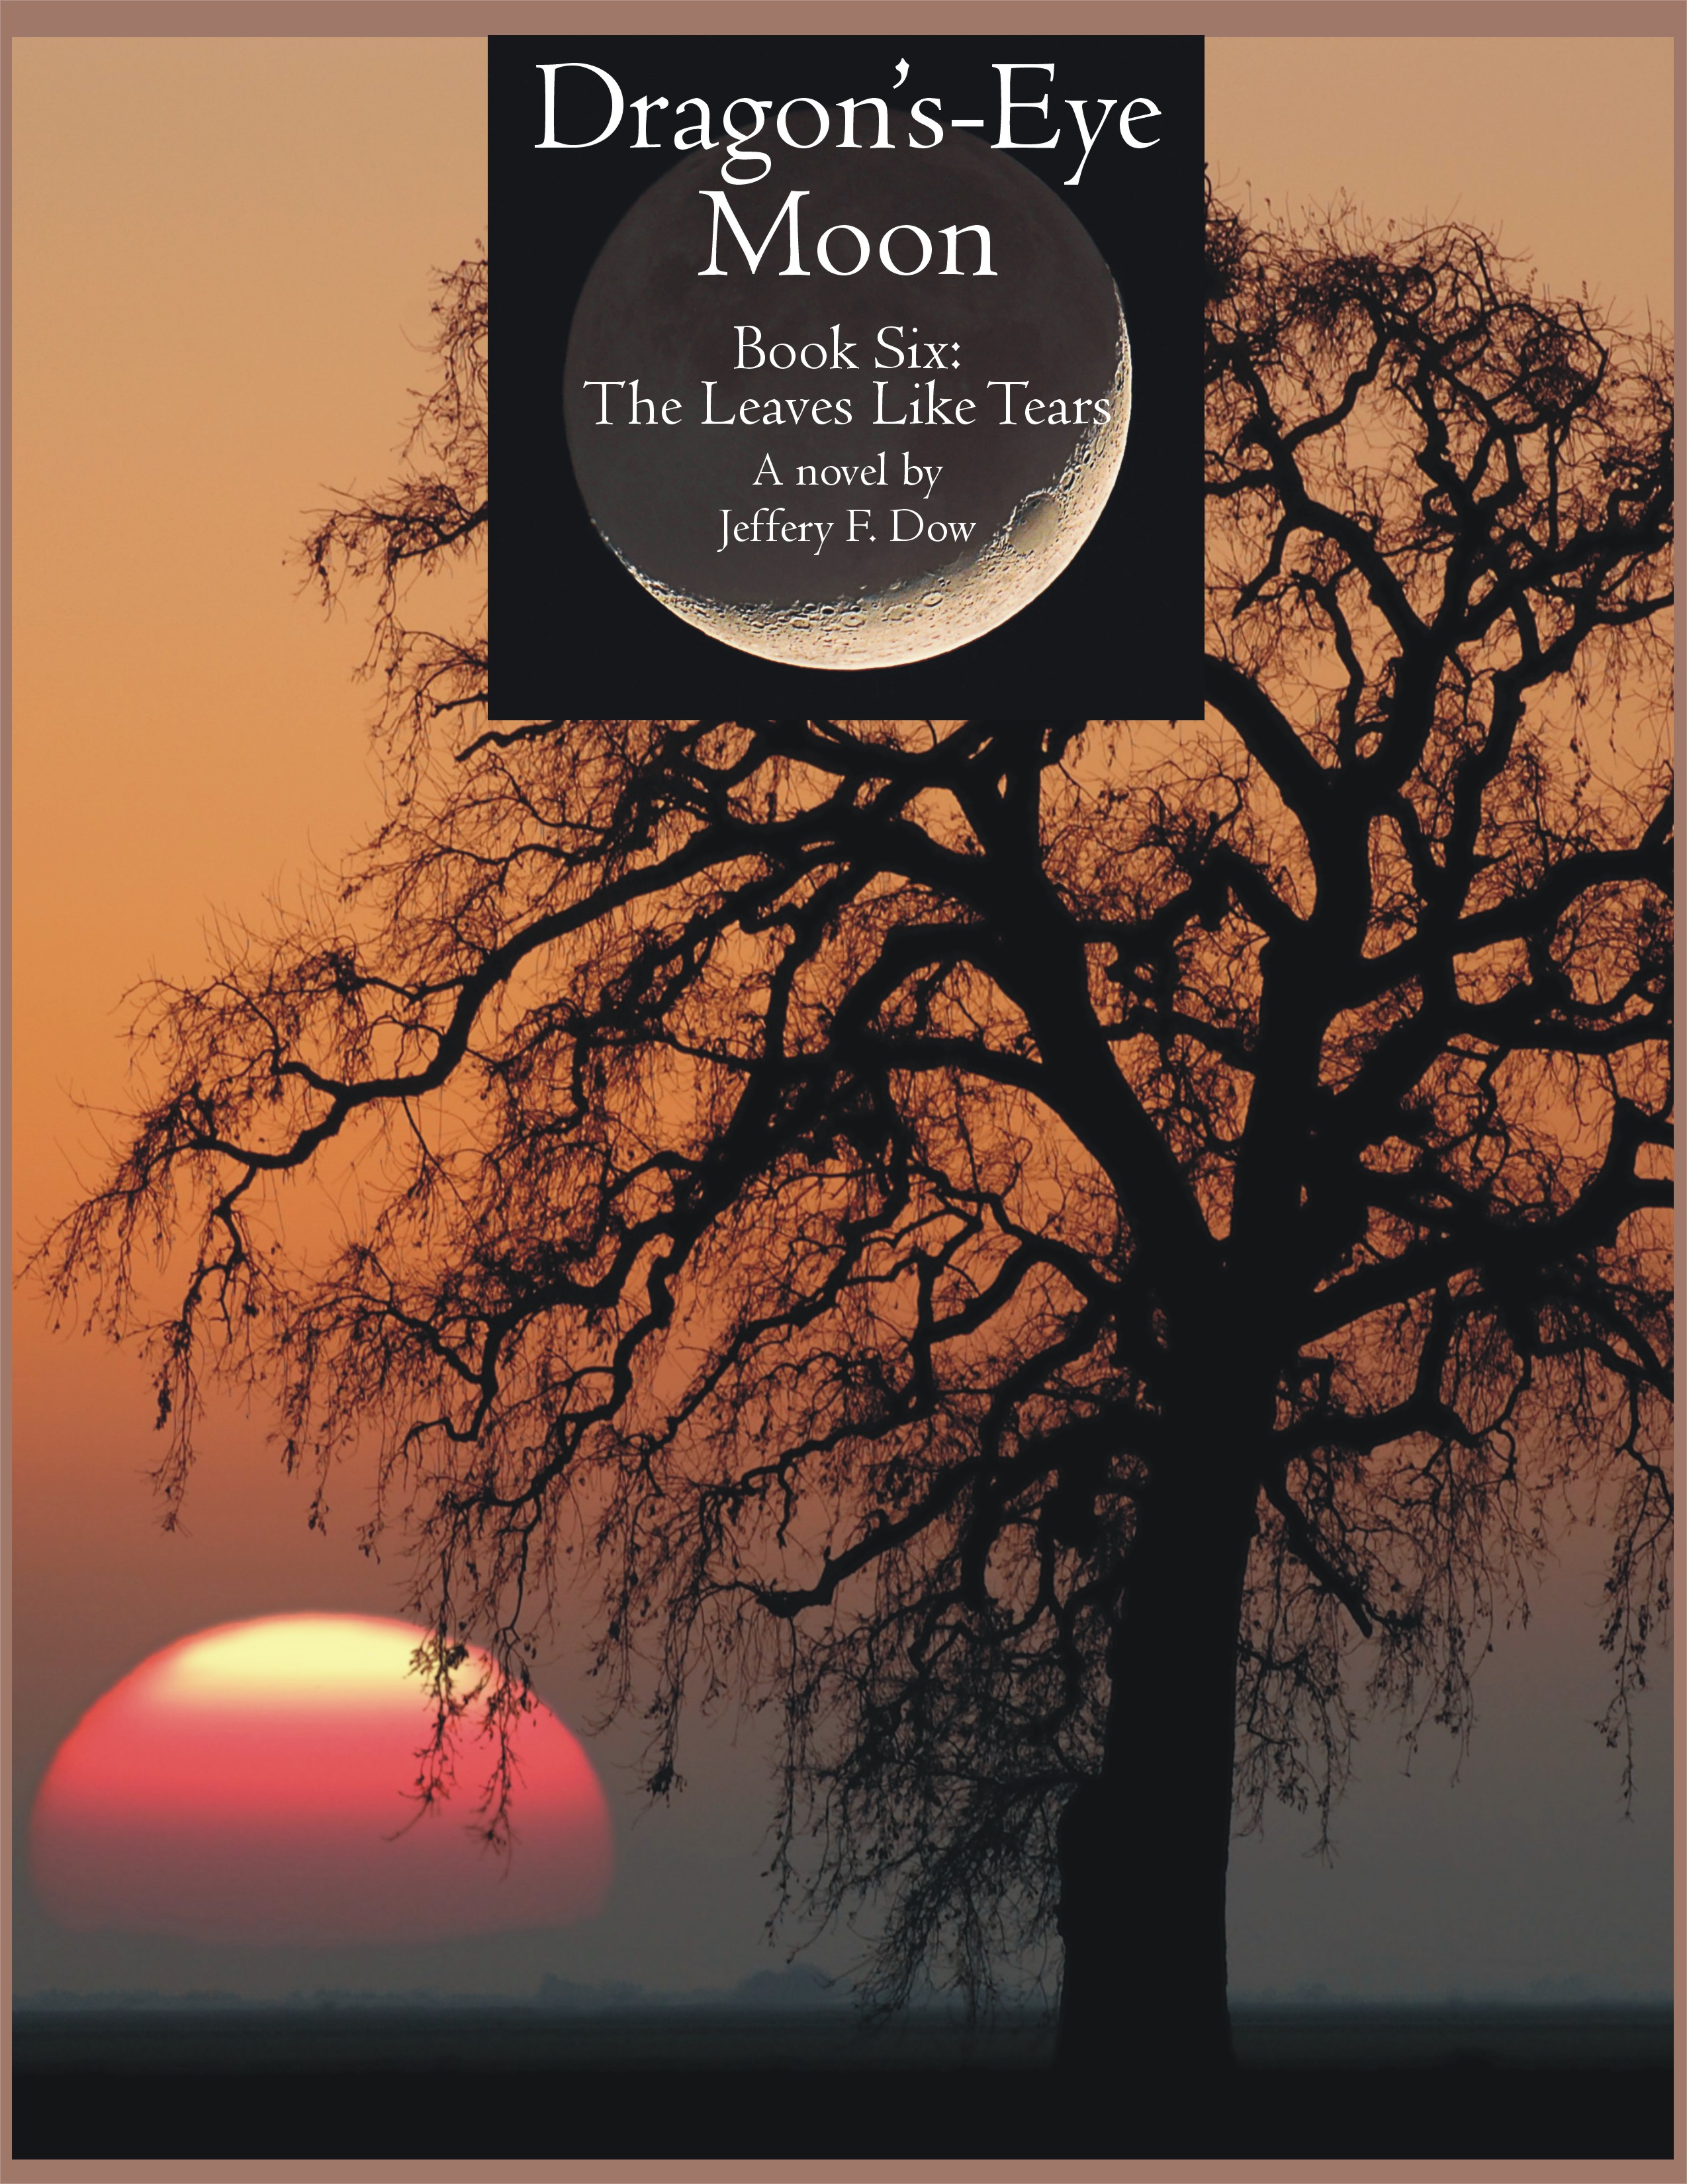 Cover of a book showing the silhouette of a leafless tree and a large red sun setting